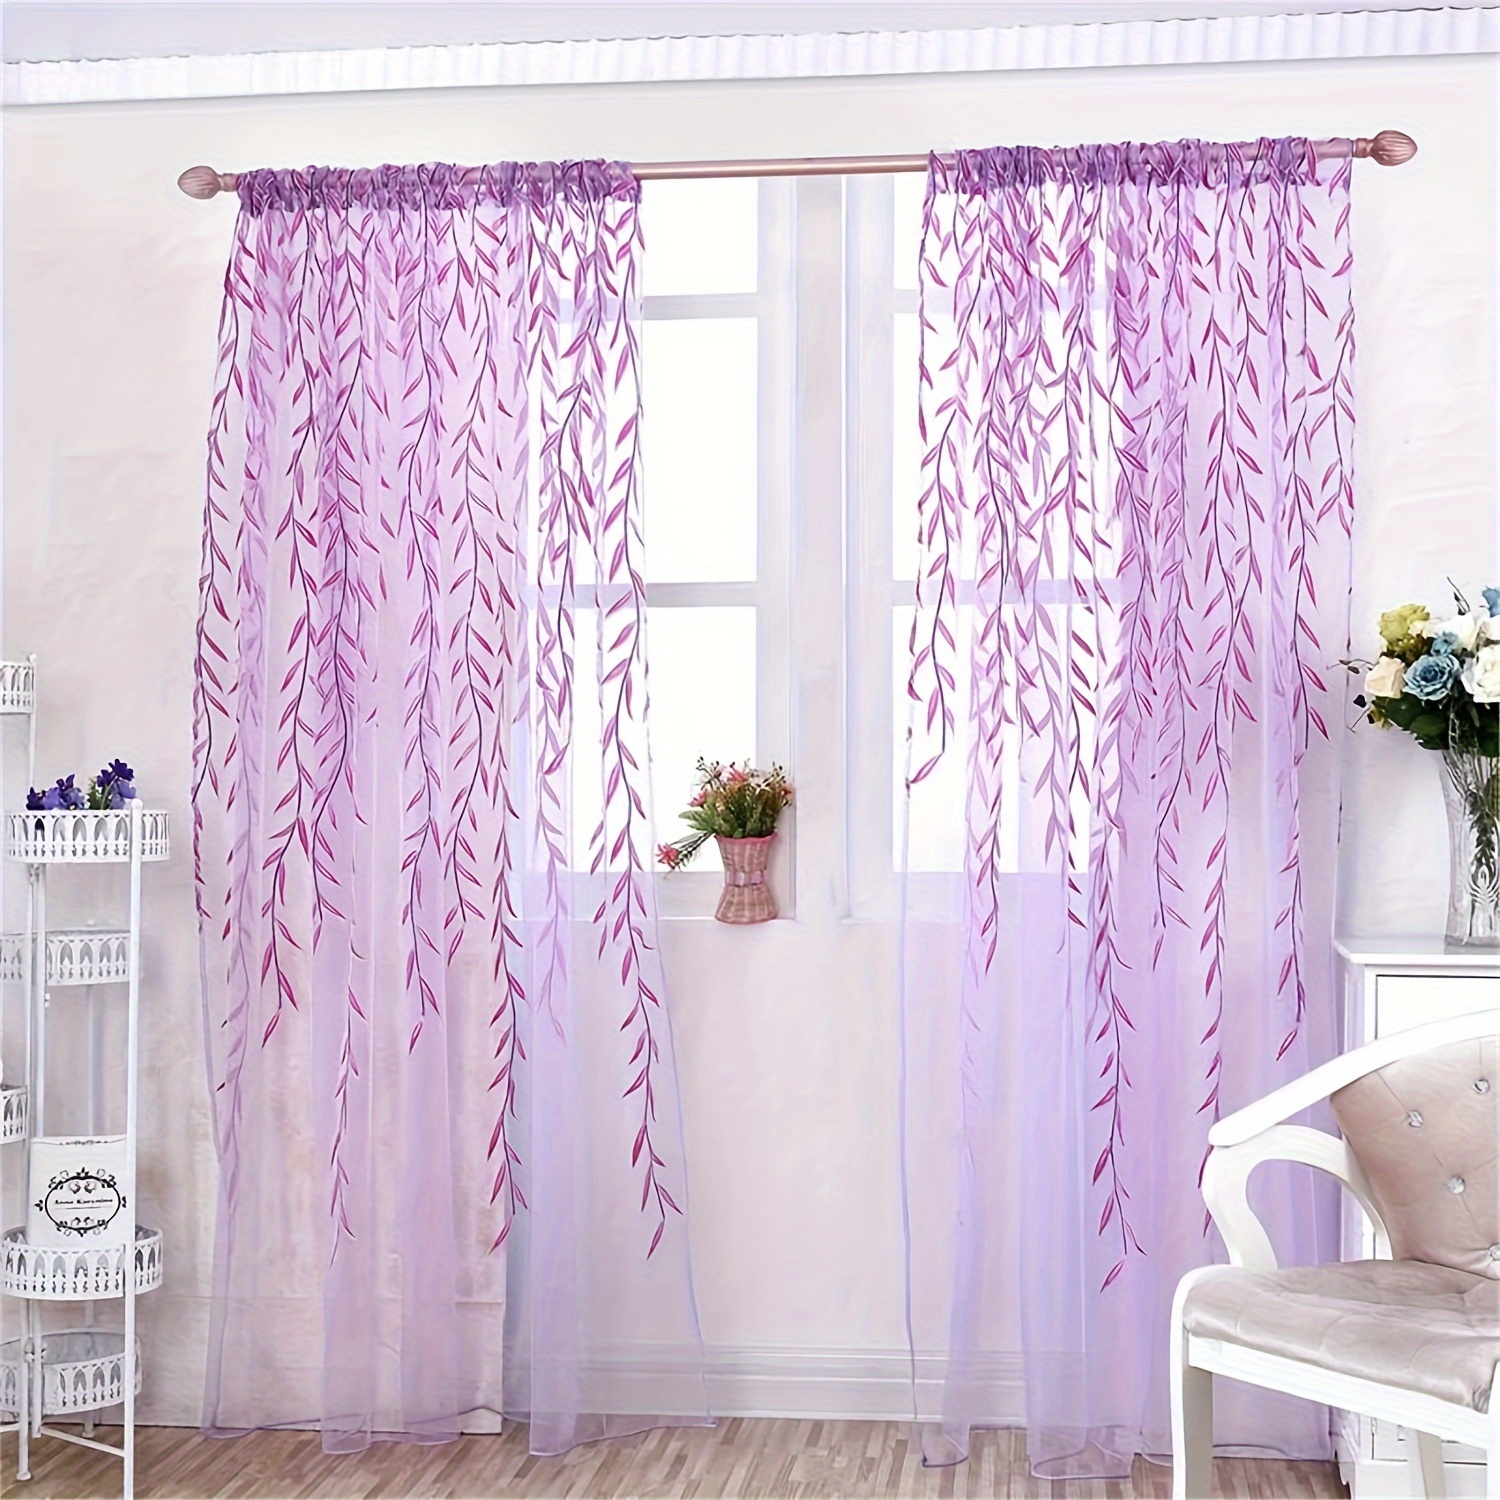 

Cool Pastoral Floral Window Curtains Print Scarf Sheer Curtain Panel 2pc